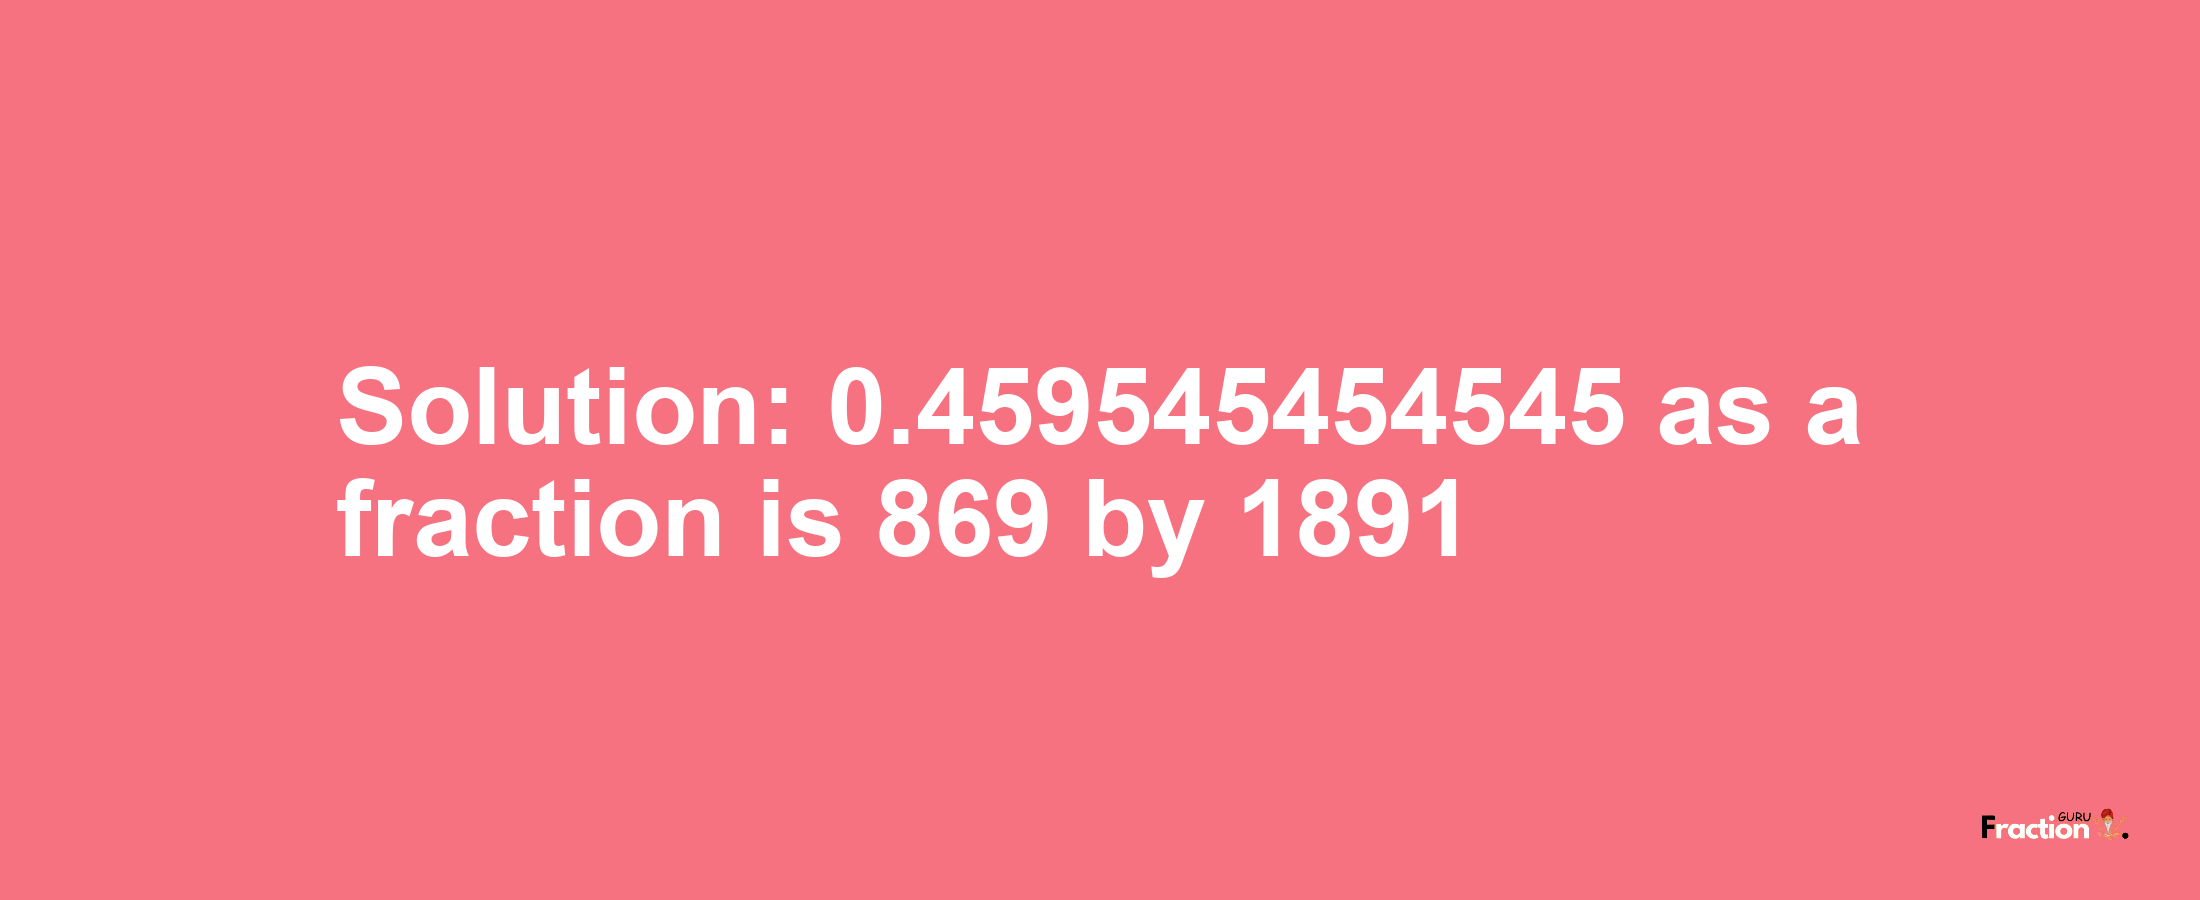 Solution:0.459545454545 as a fraction is 869/1891